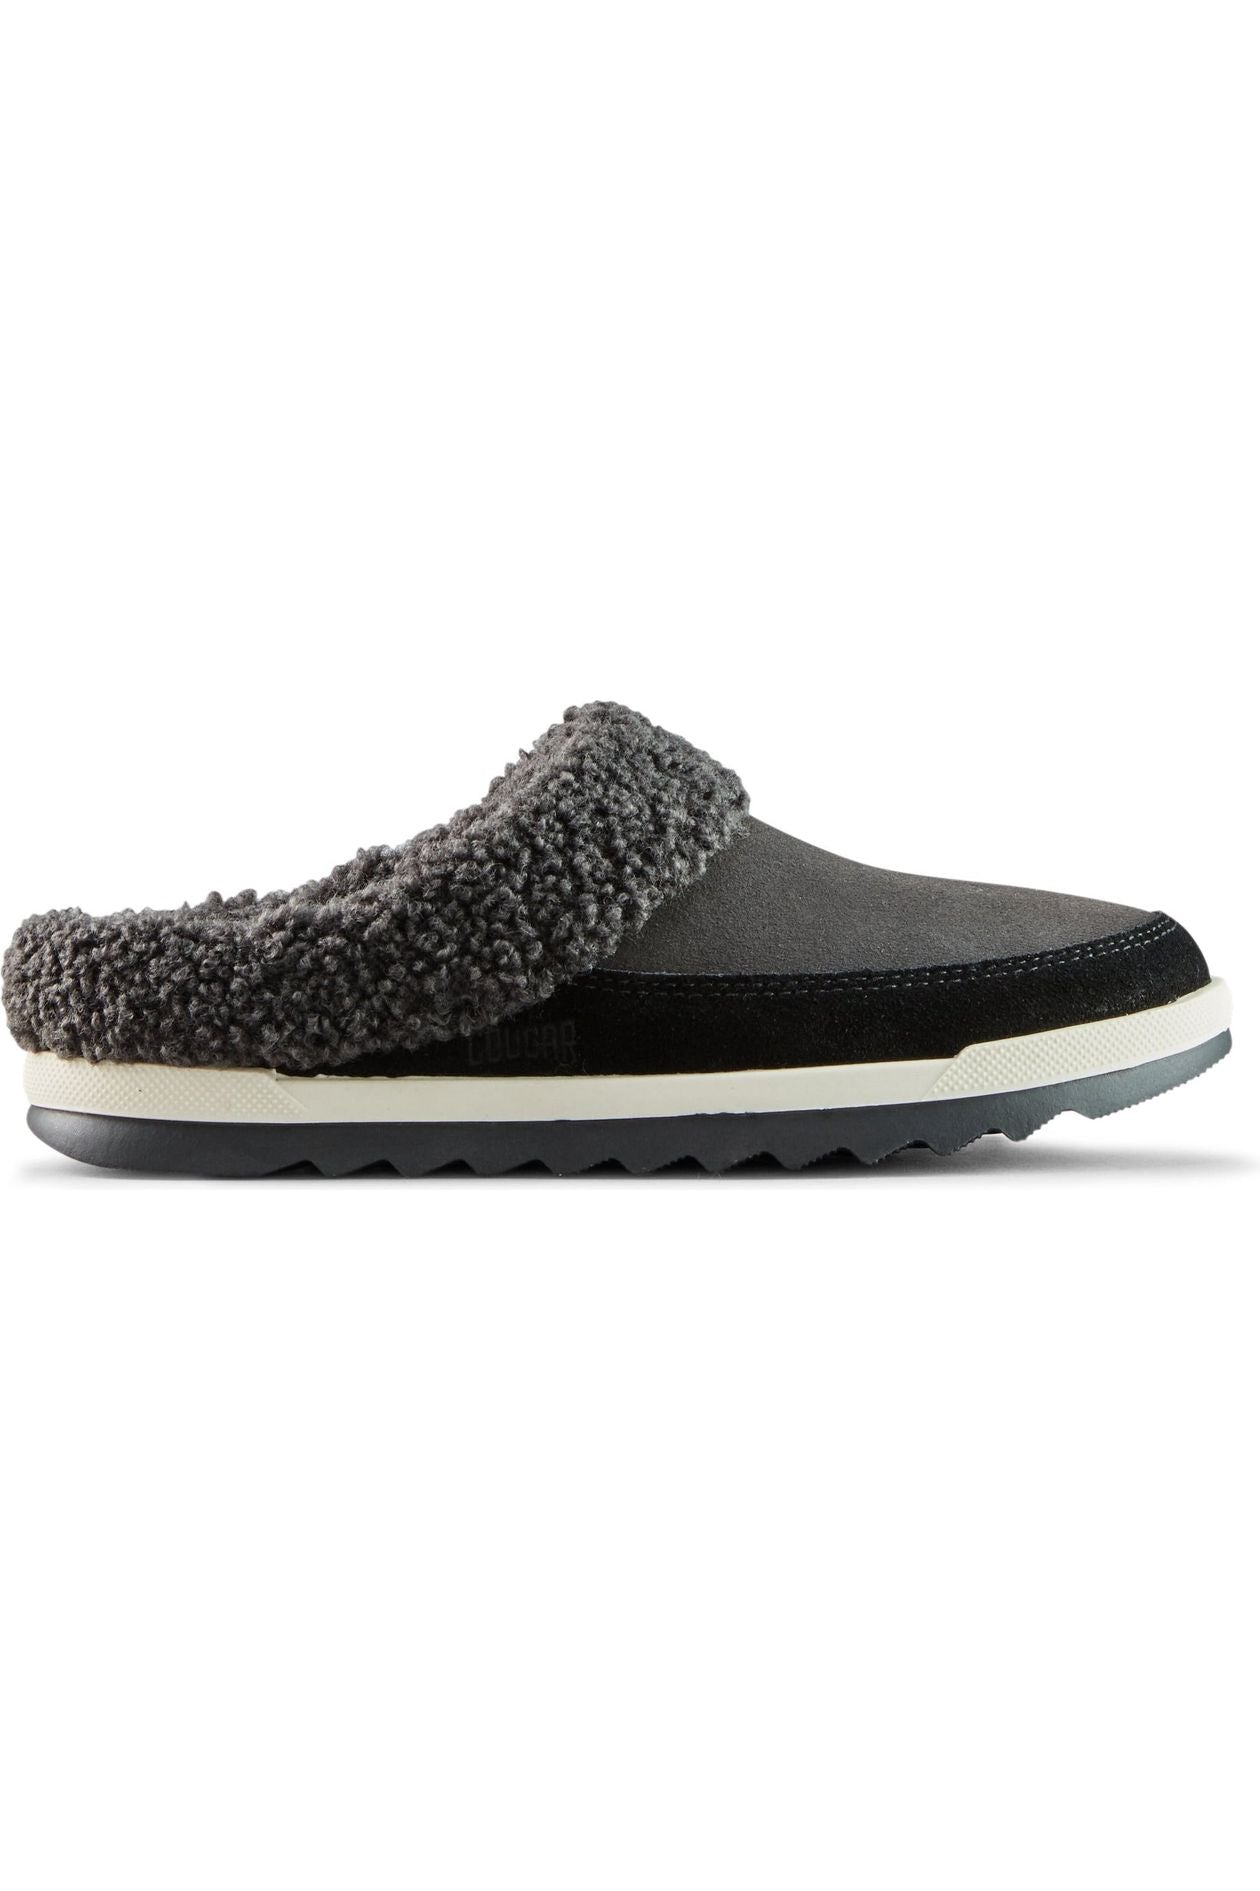 Cougar Indoor/Outdoor Suede Mule Slipper - Style Liliana, pewter/black, outside